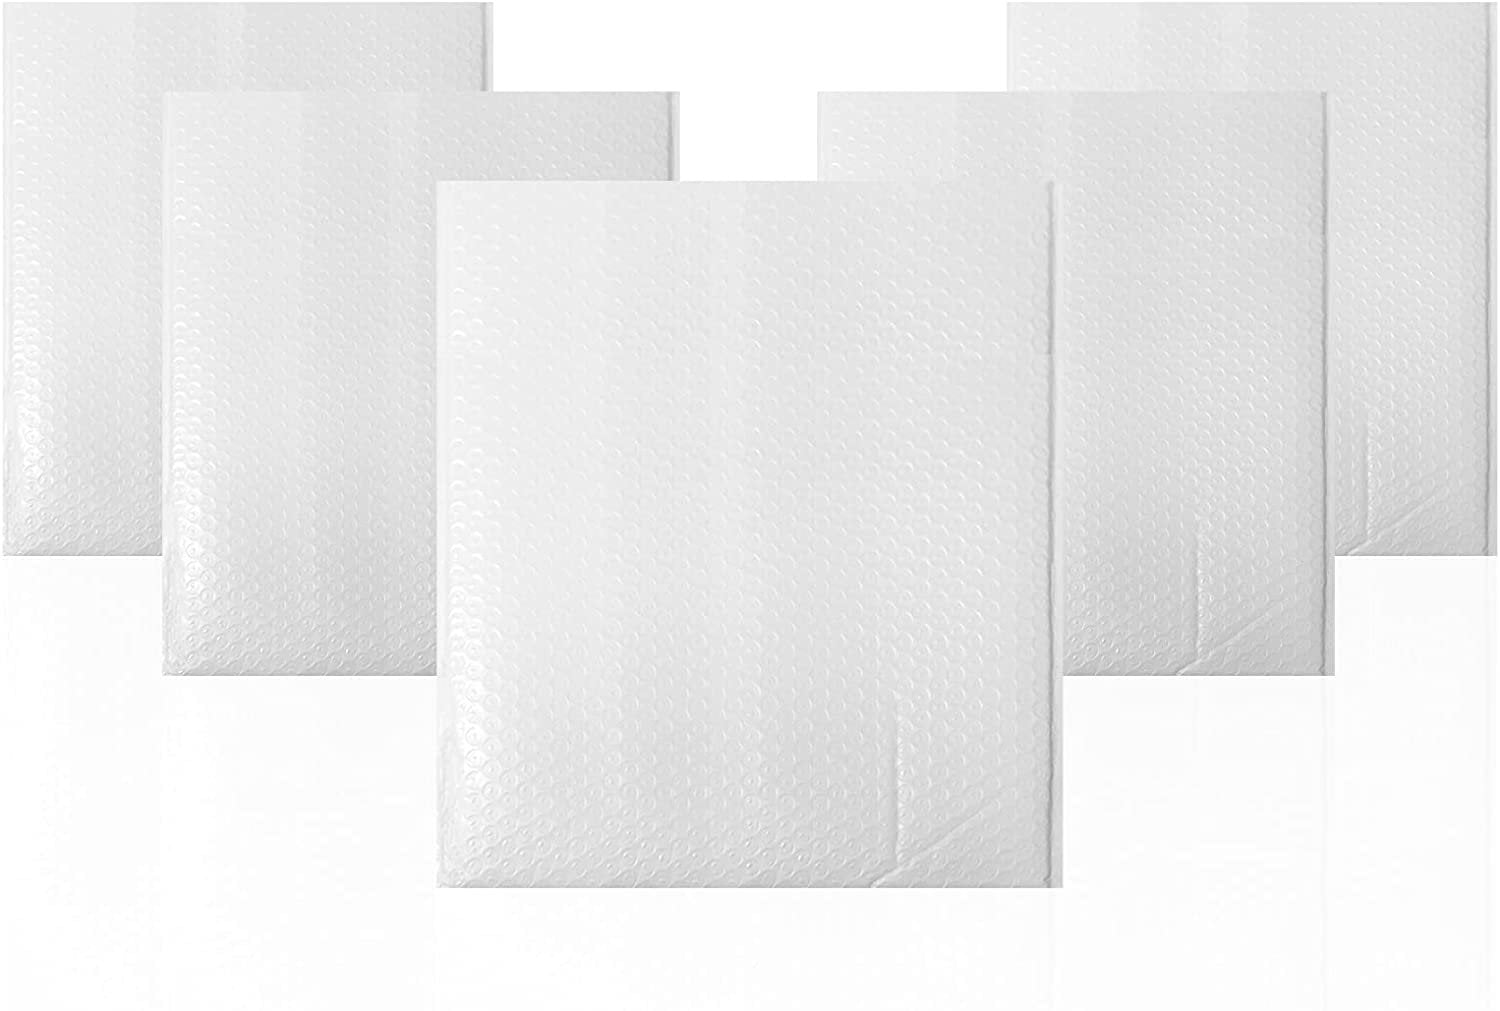 Details about   Bubble Padded  Mailer Sealable Envelope 8 1/2 " x 11 1/2' 